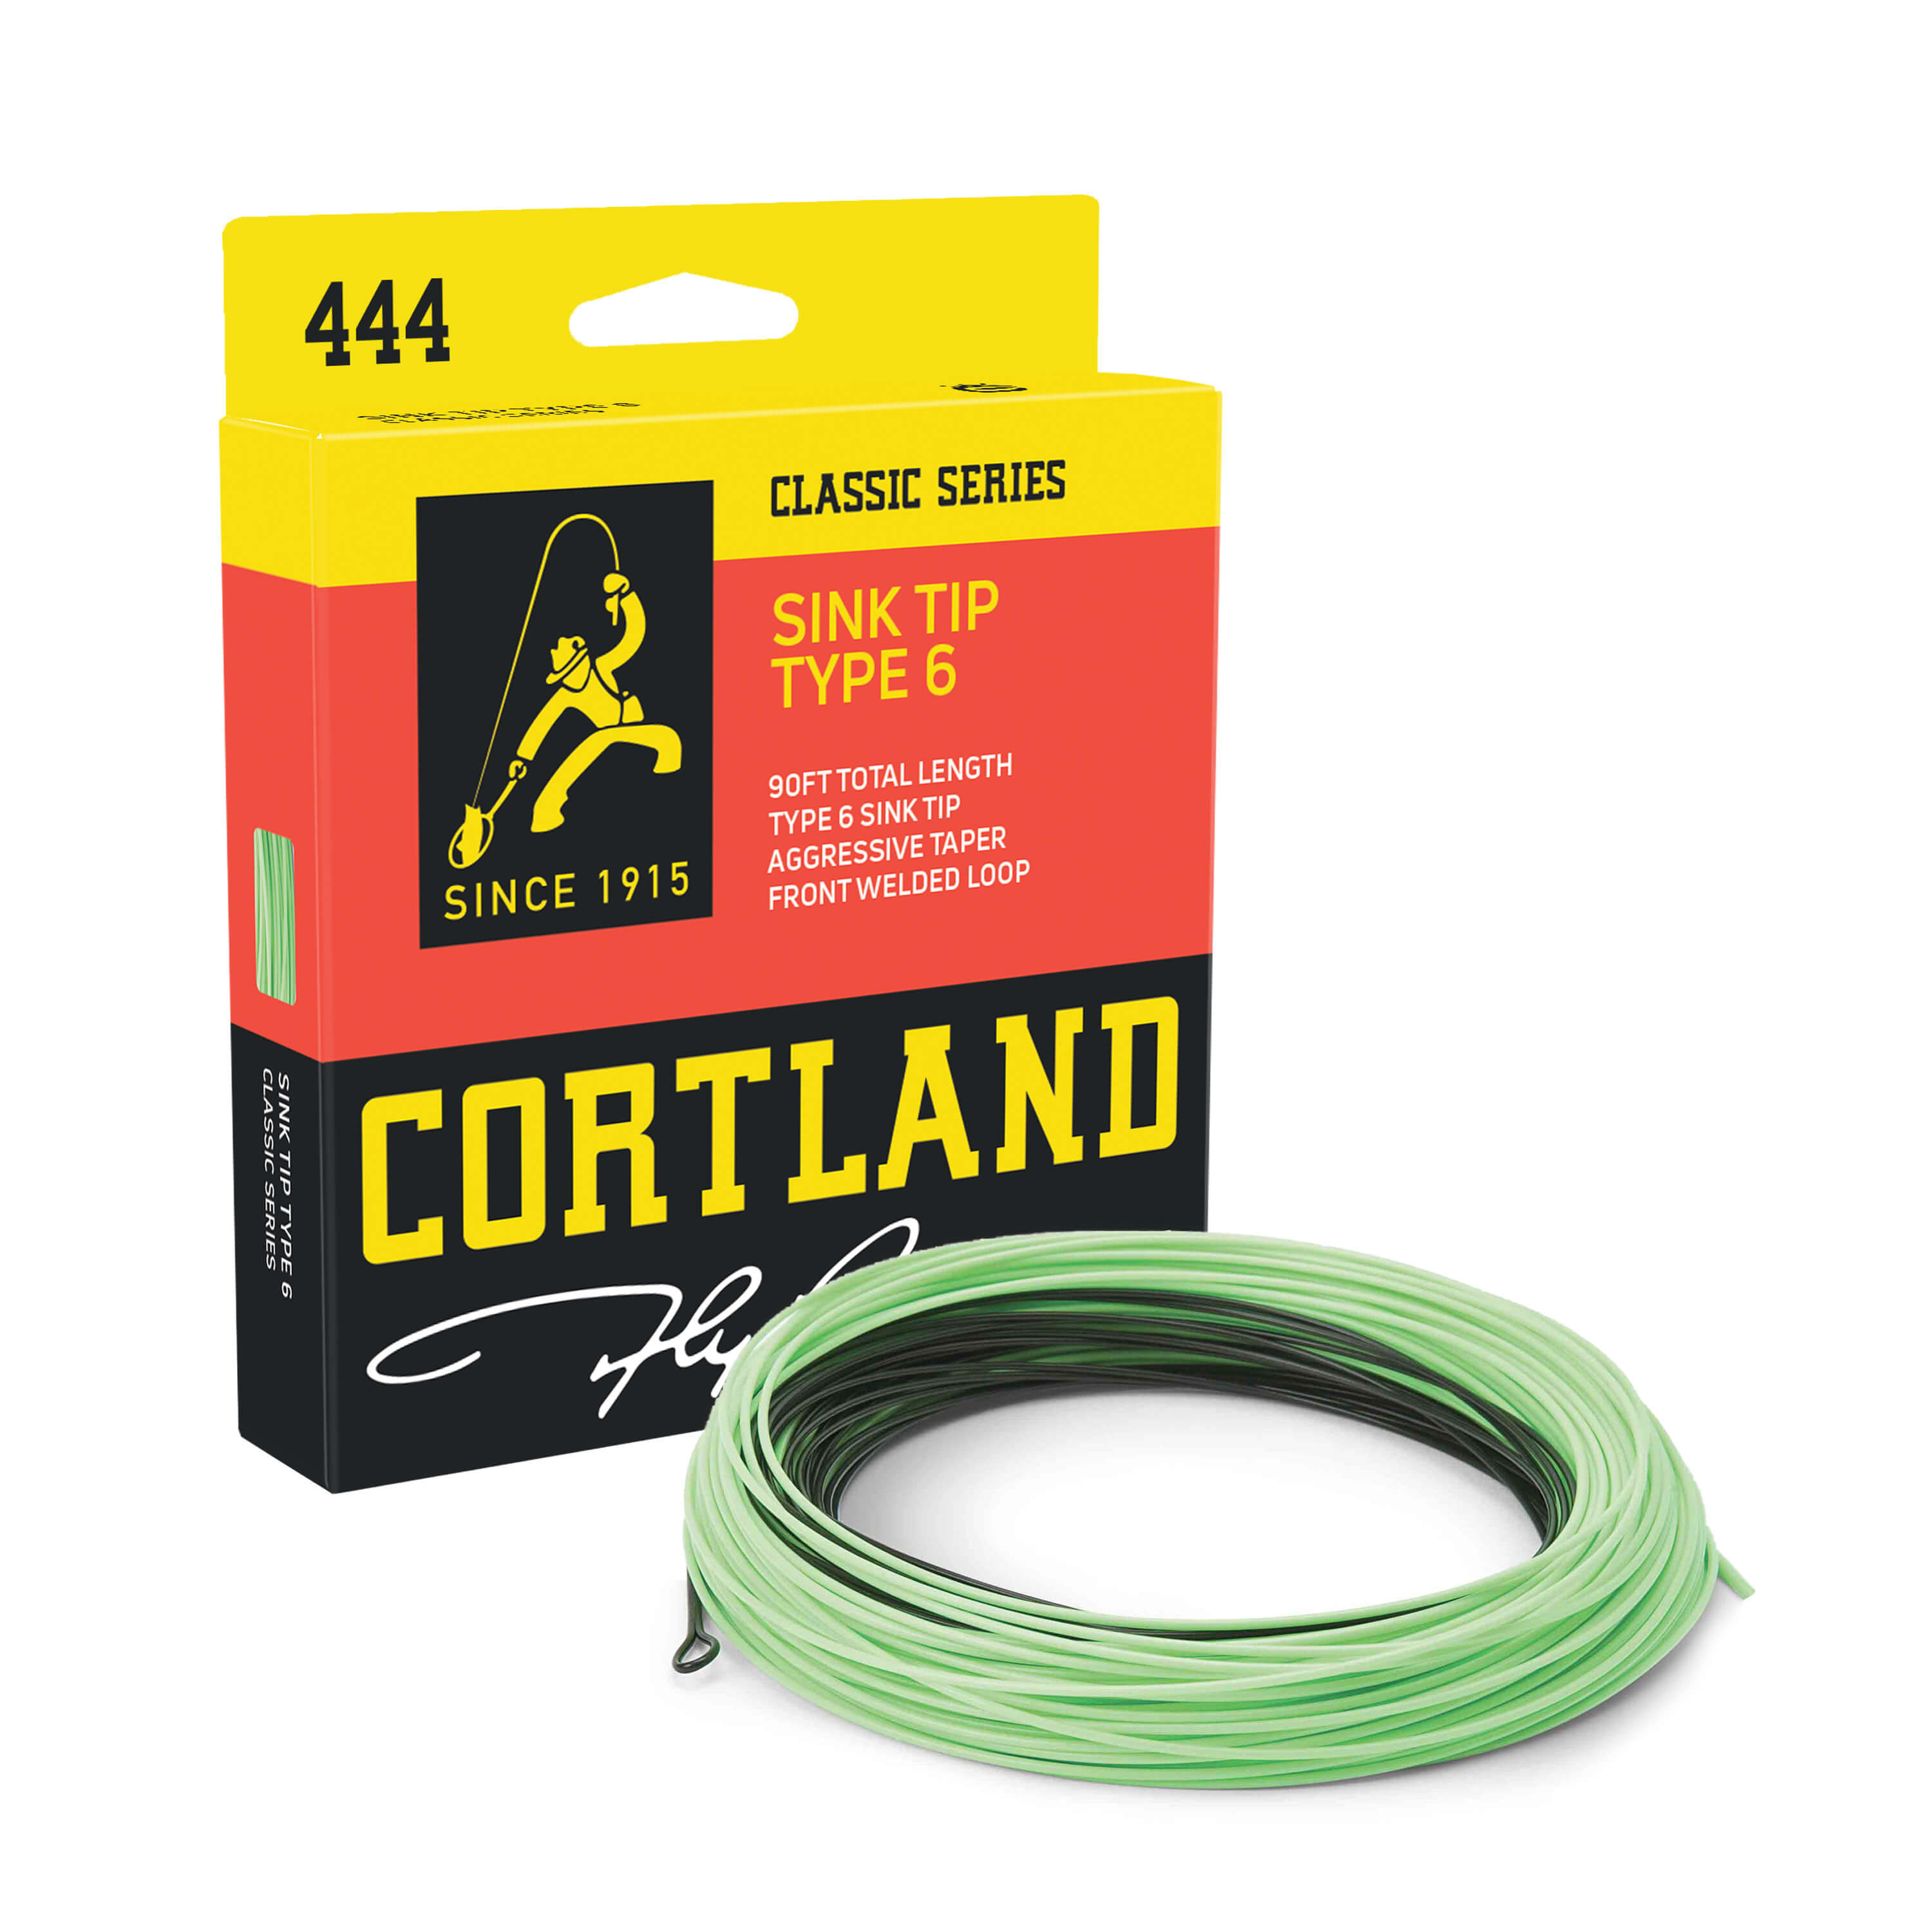 Sinking Line Fly Fishing, Fishing Lines Fly Wf 5